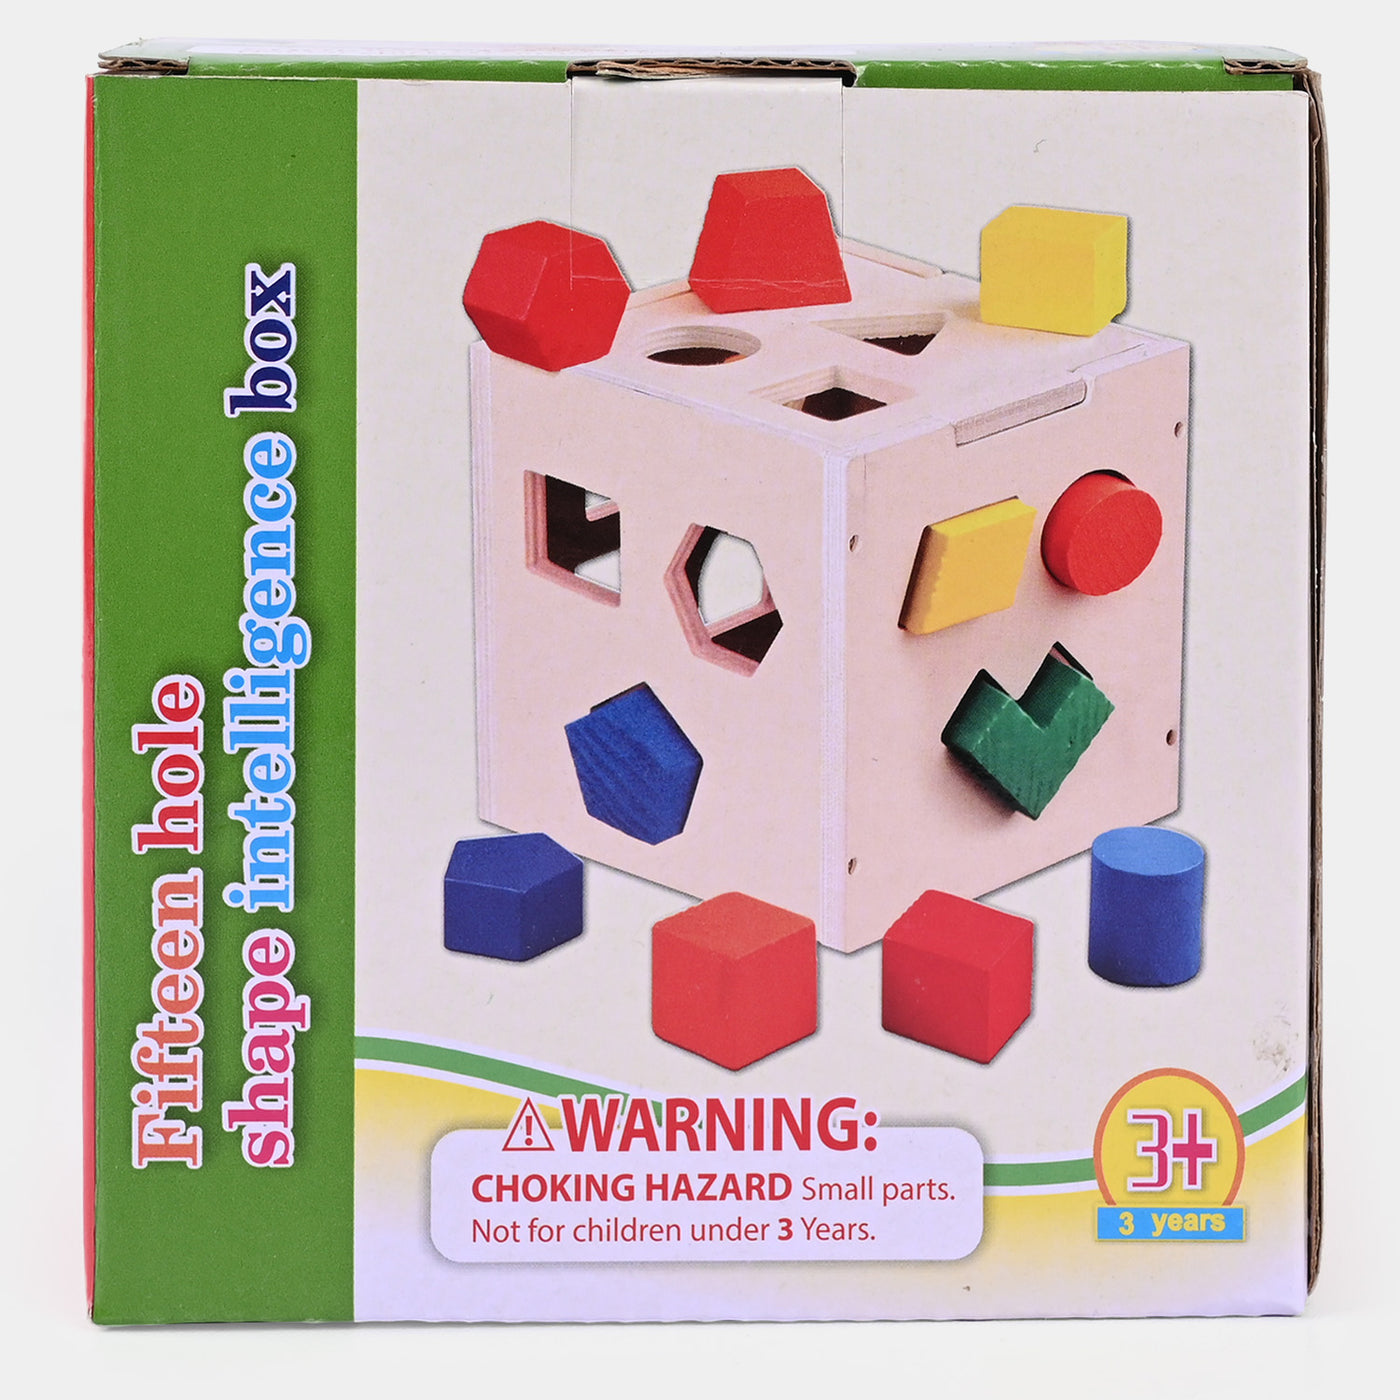 Wooden Toy Fifteen Hole Shape For Kids